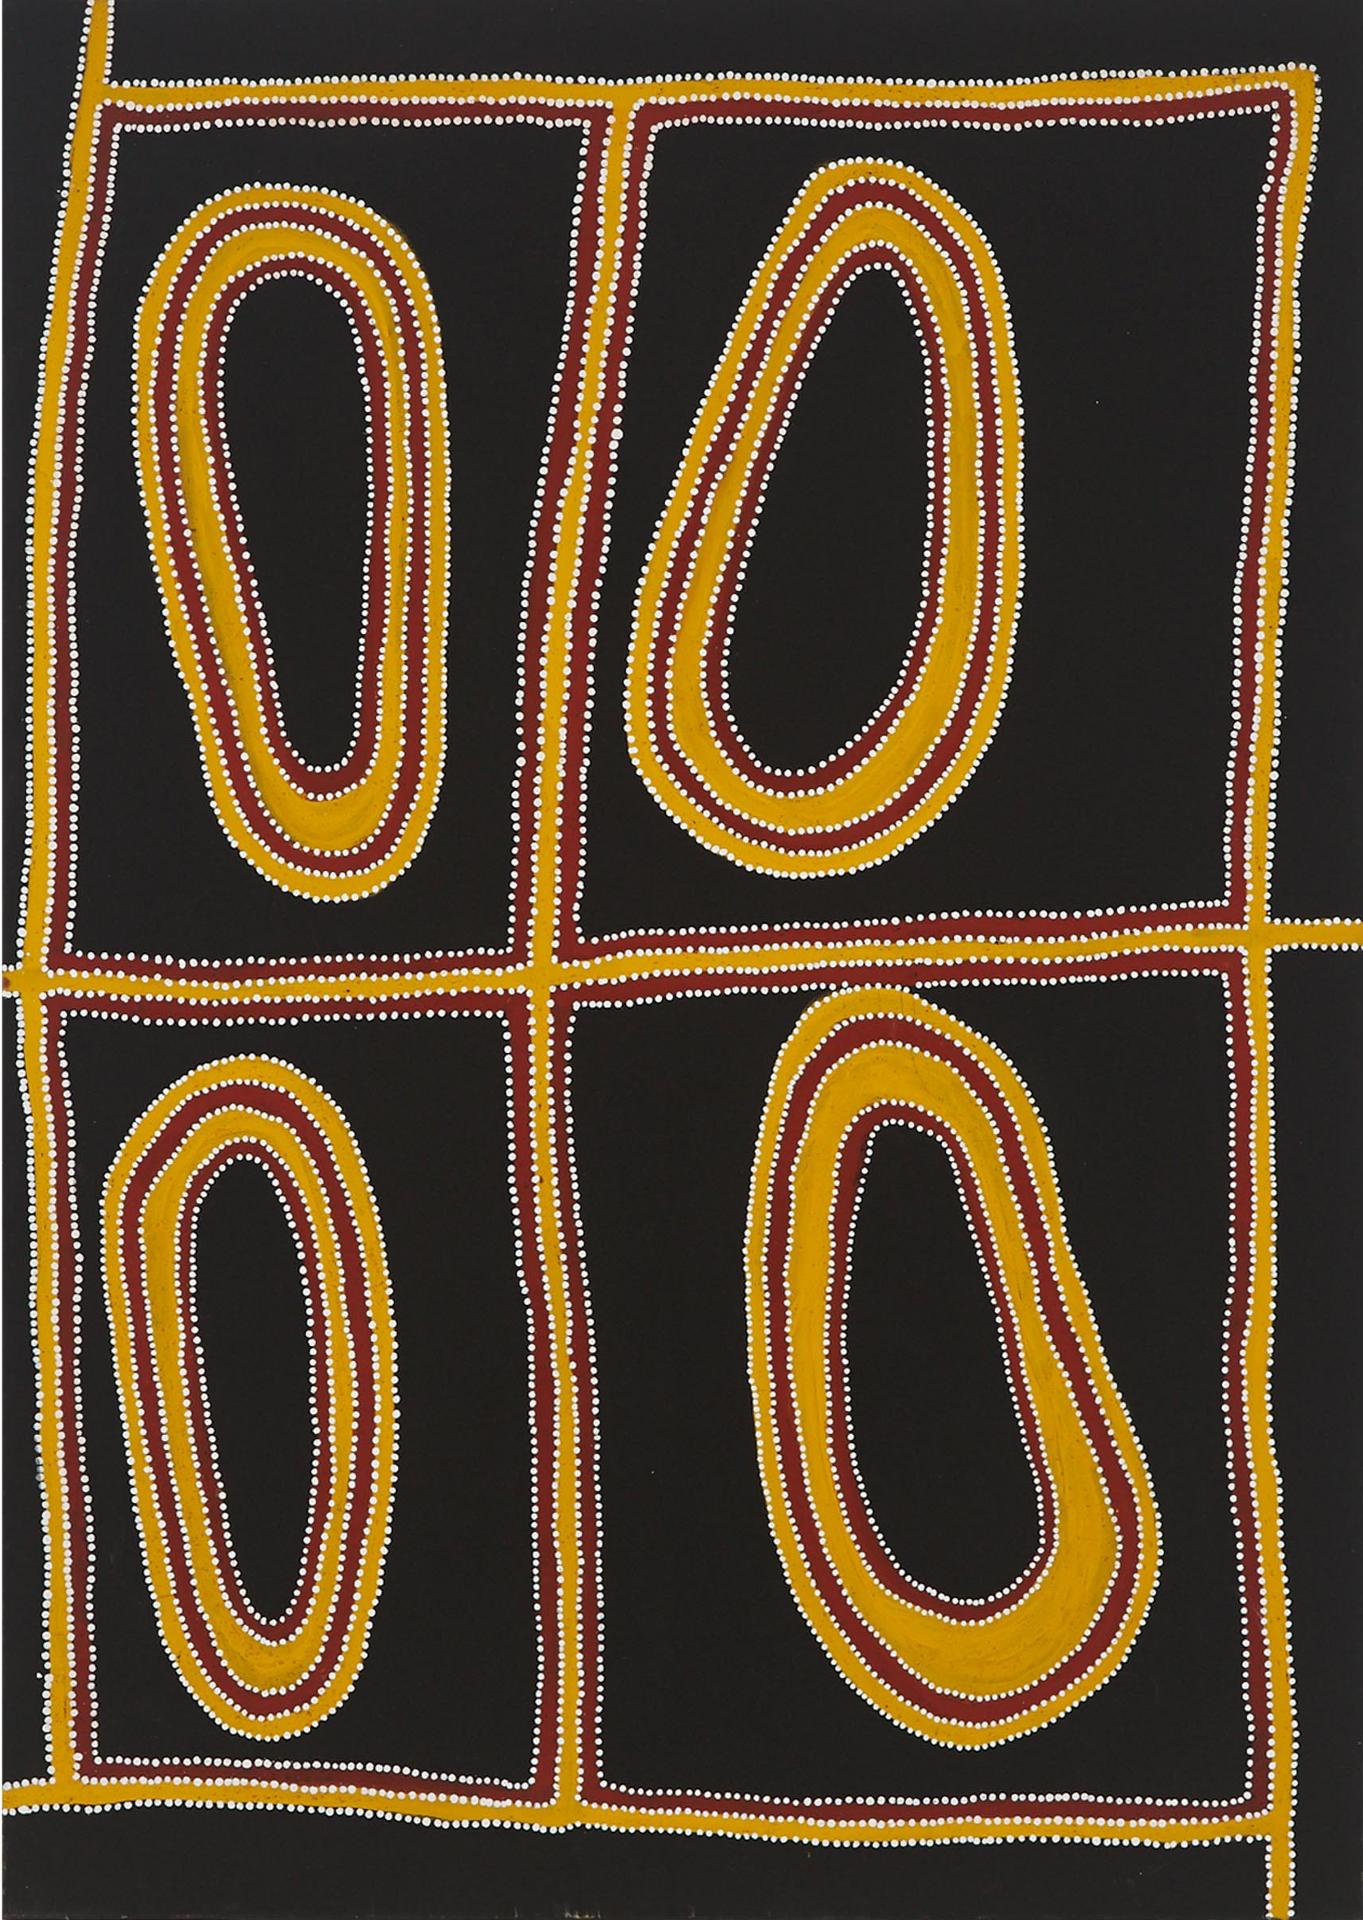 Tjangala George Wallaby (1930-2002) - Design With 4 Circles